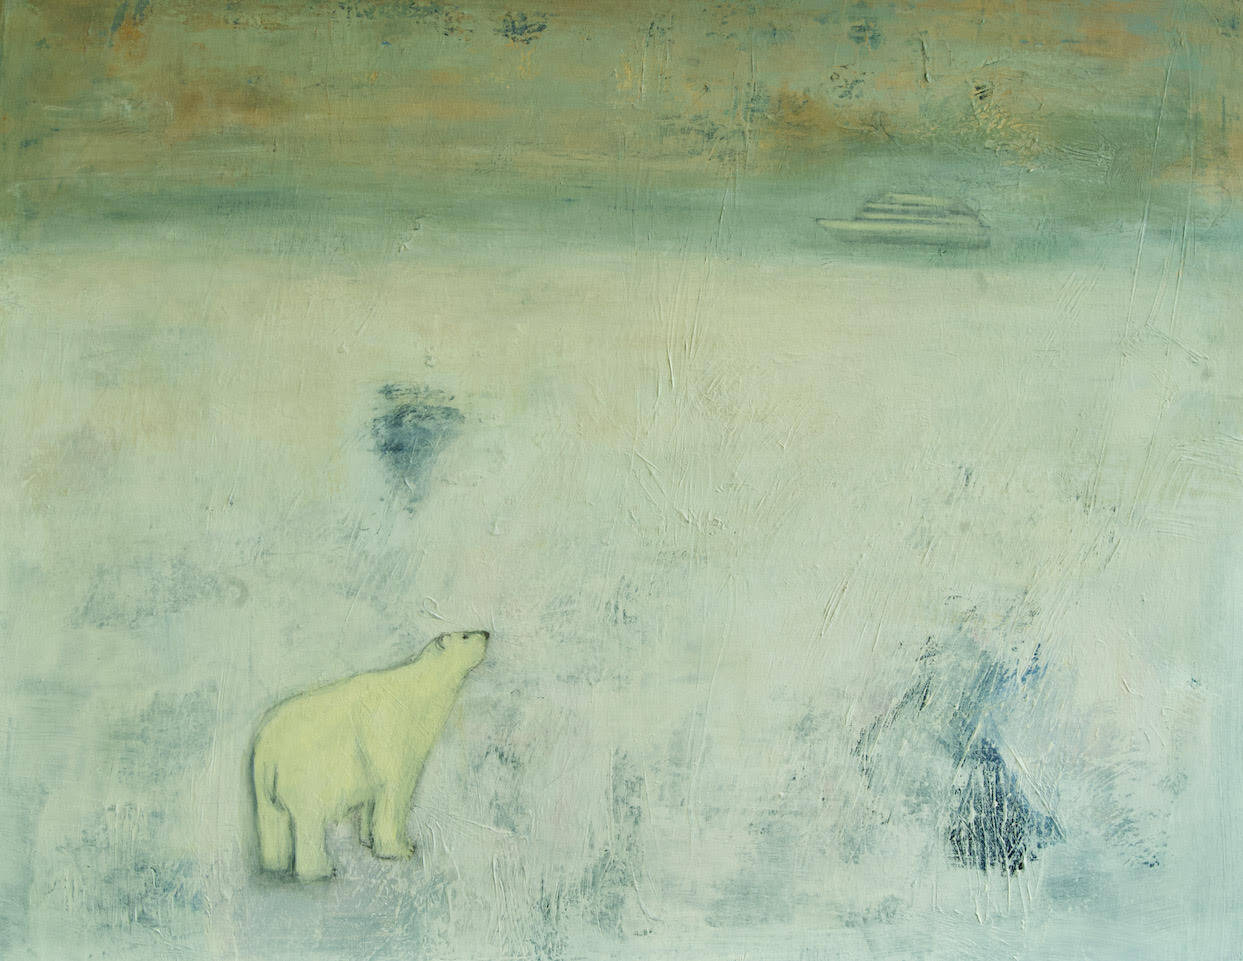 Painting of polar bear on Ice watching a ship in a distance.